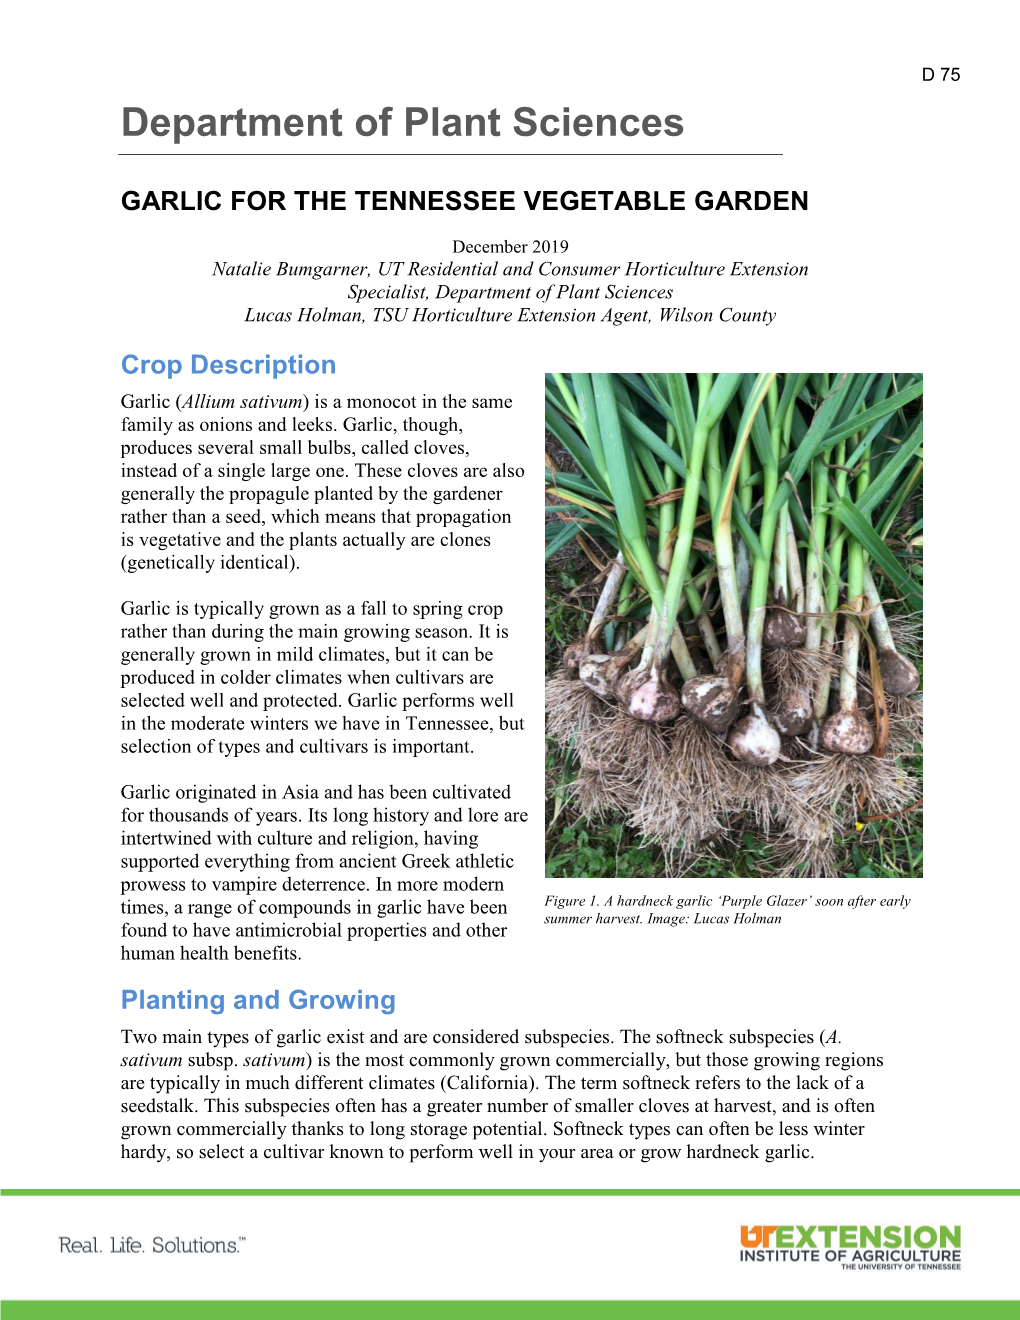 D 75 Garlic for the Tennessee Vegetable Garden